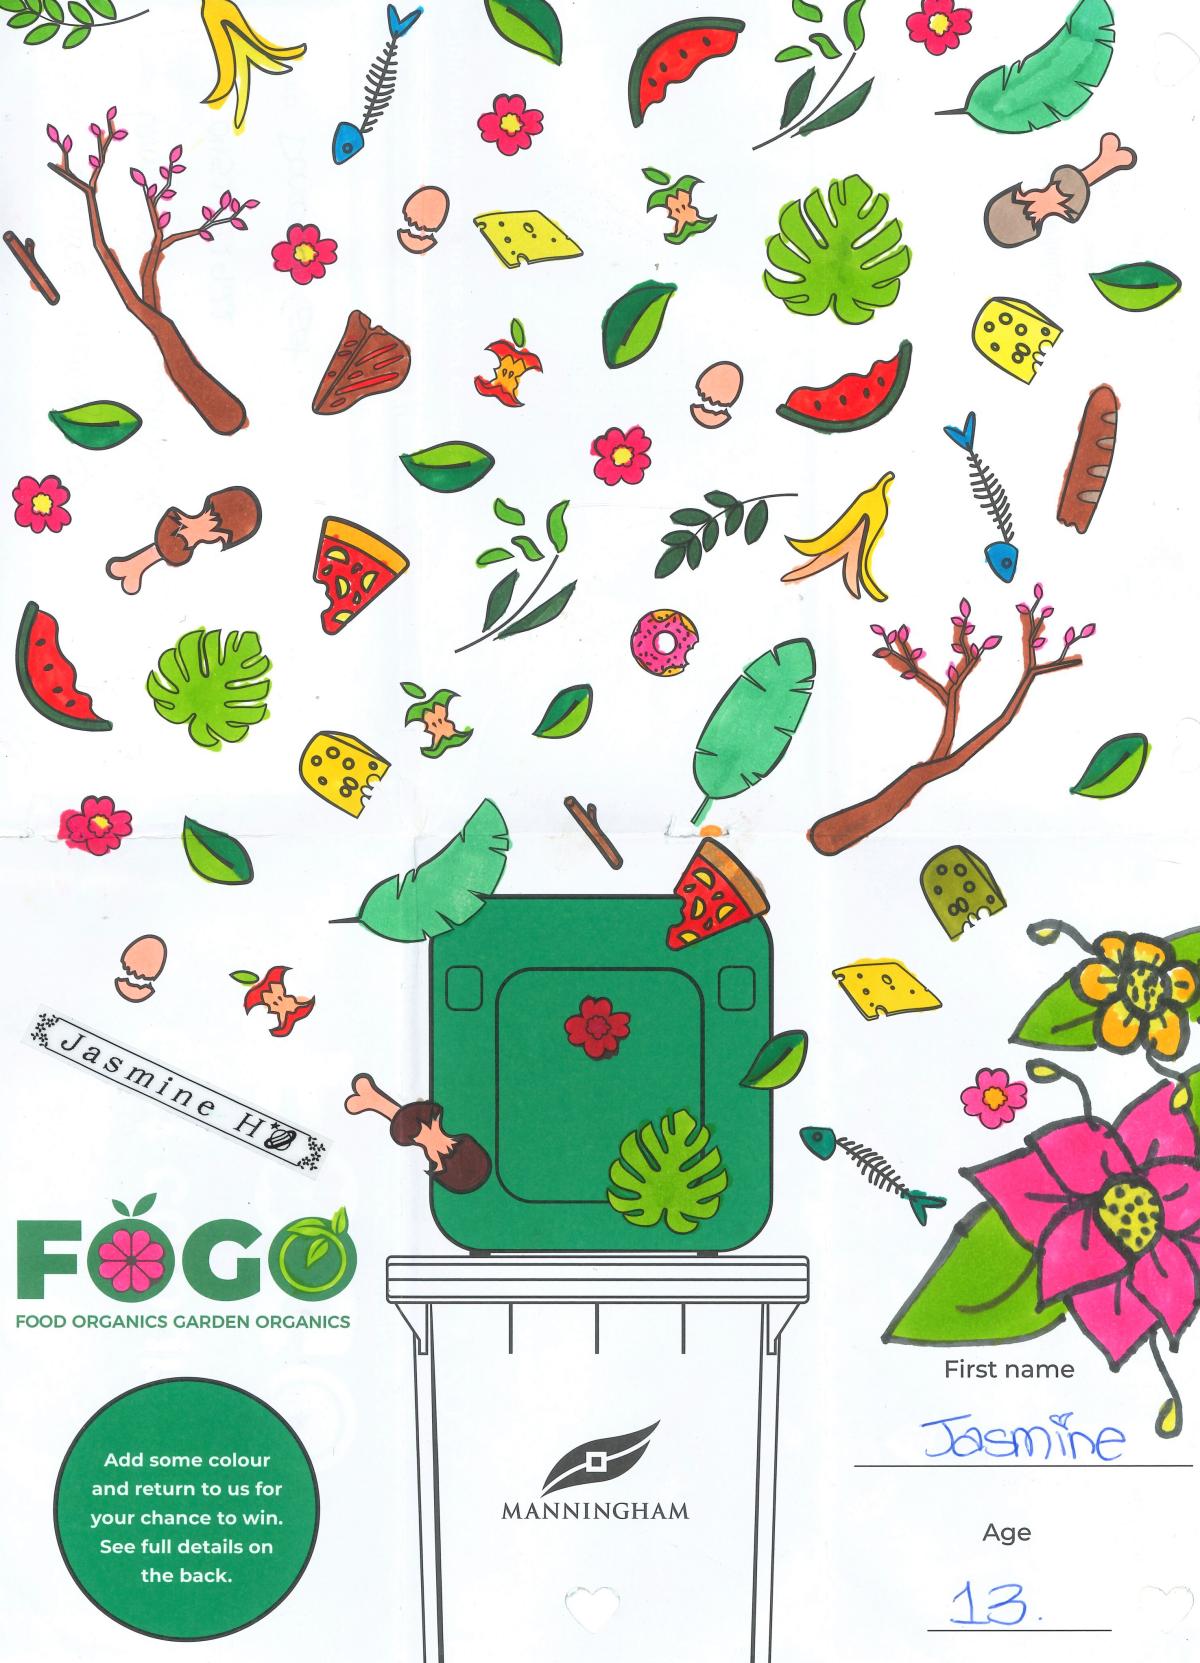 An image of a FOGO bin with all sorts of organic rubbish falling into it from above. The name 'Jasmine' is in the bottom right corner.